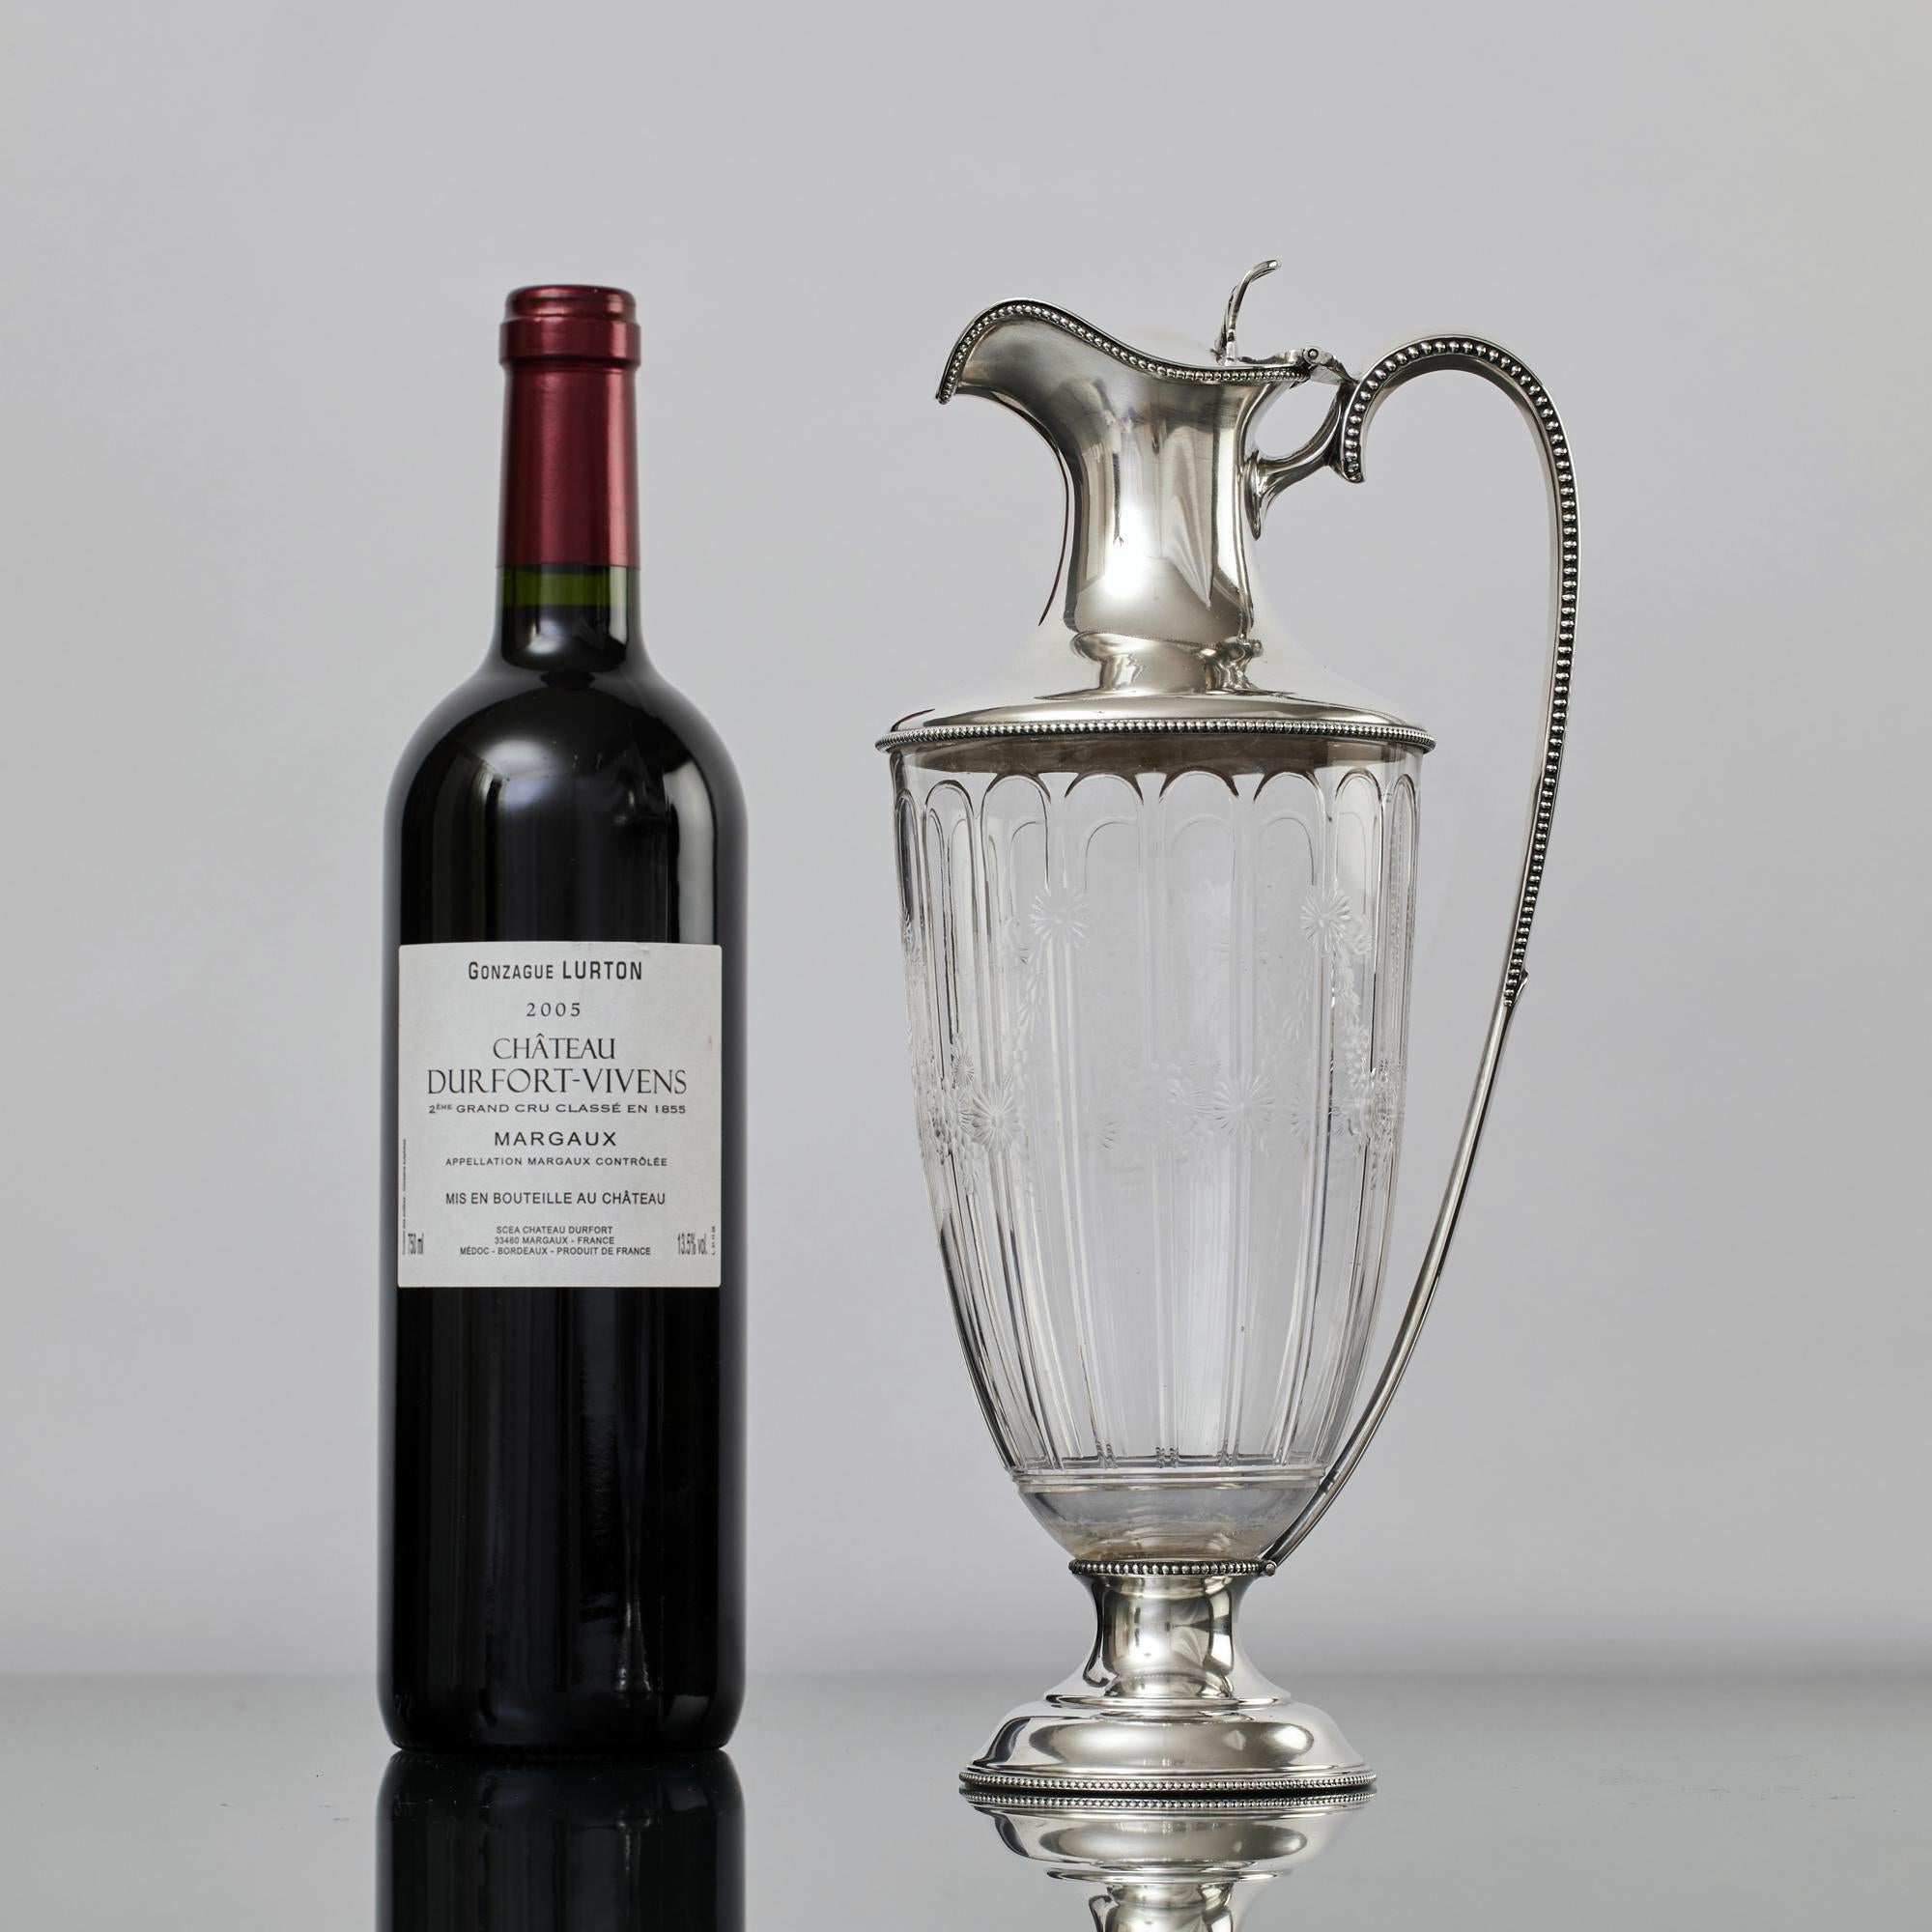 Elegant, neoclassical style engraved glass antique wine jug with silver handle and mounts. Made during the latter part of the Edwardian era, the jug's glass body is hand blow and beautifully hand engraved in floral swag patterns, typical motifs of